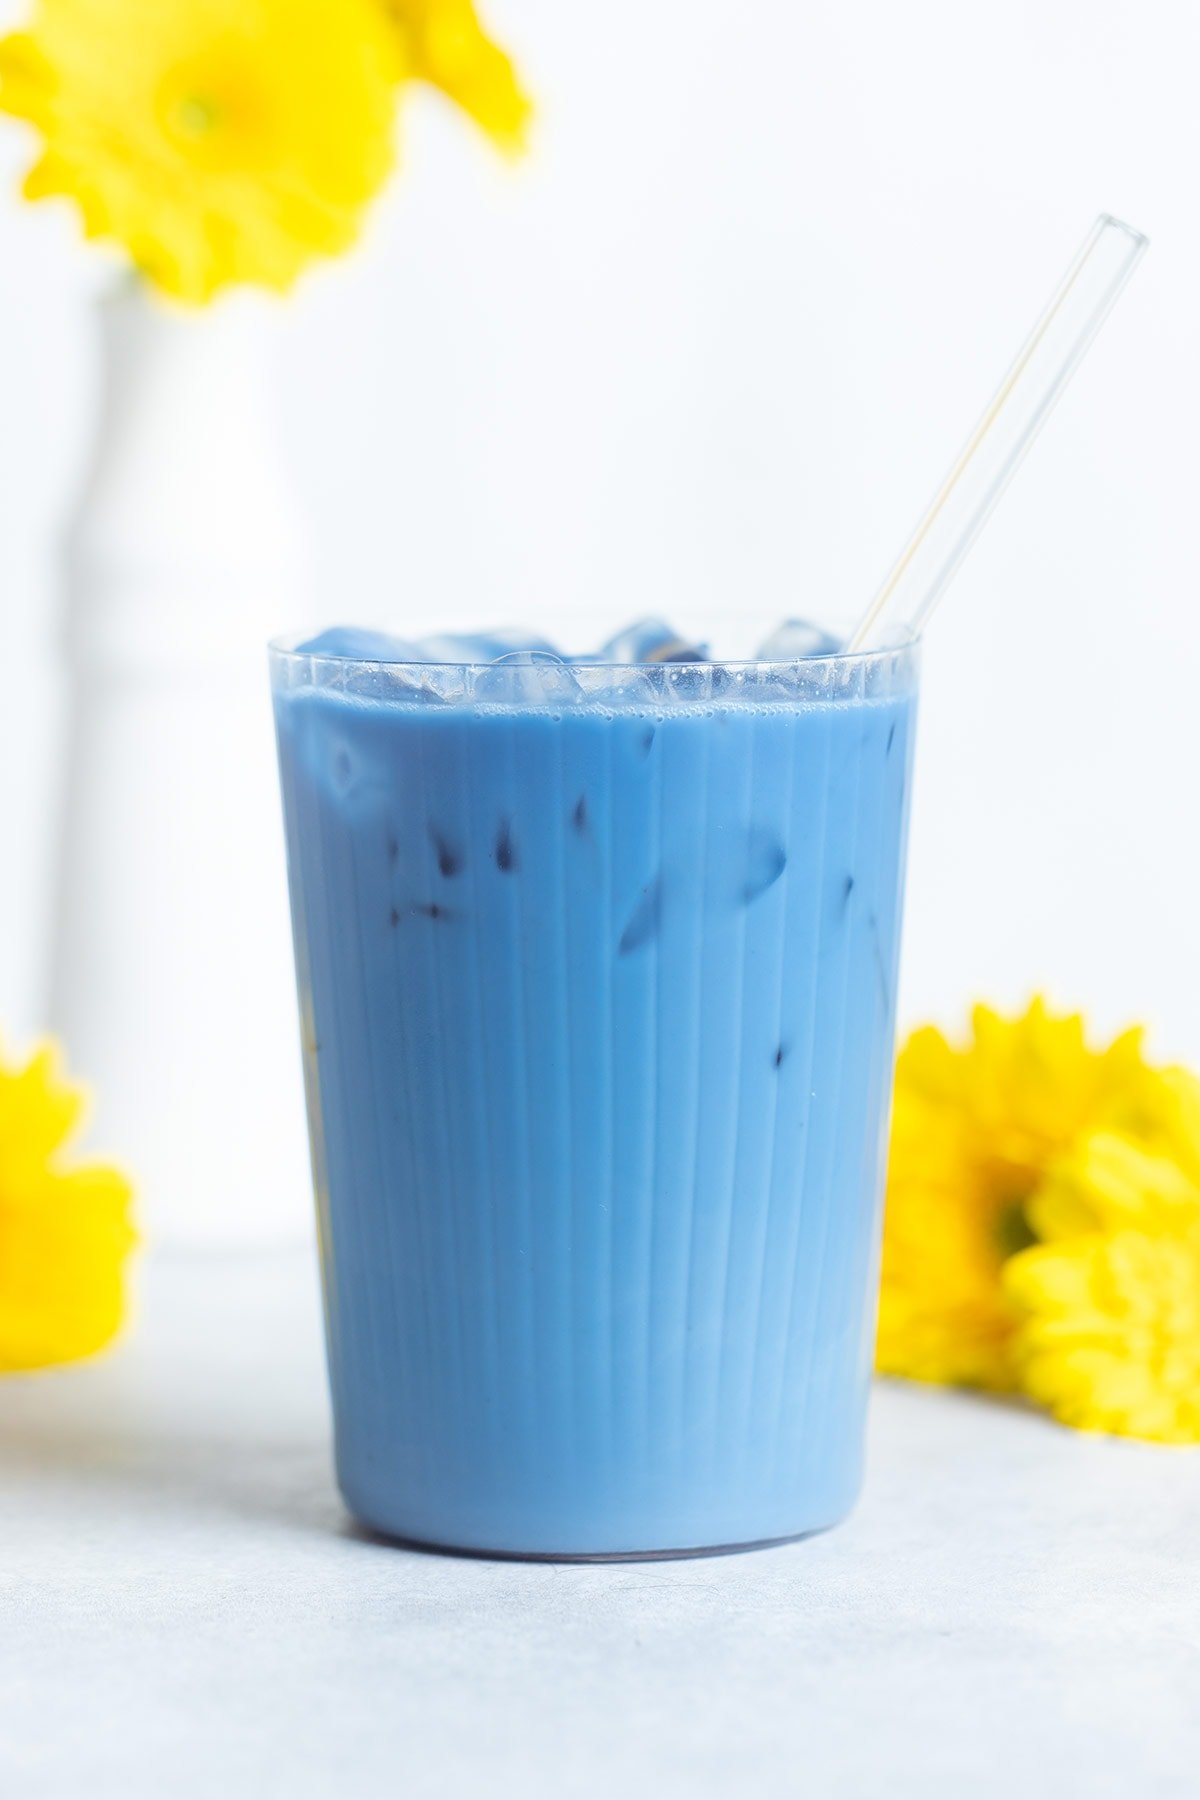 Bright blue iced latte in a tall ribbed glass with a glass straw and yellow flowers around the glass.